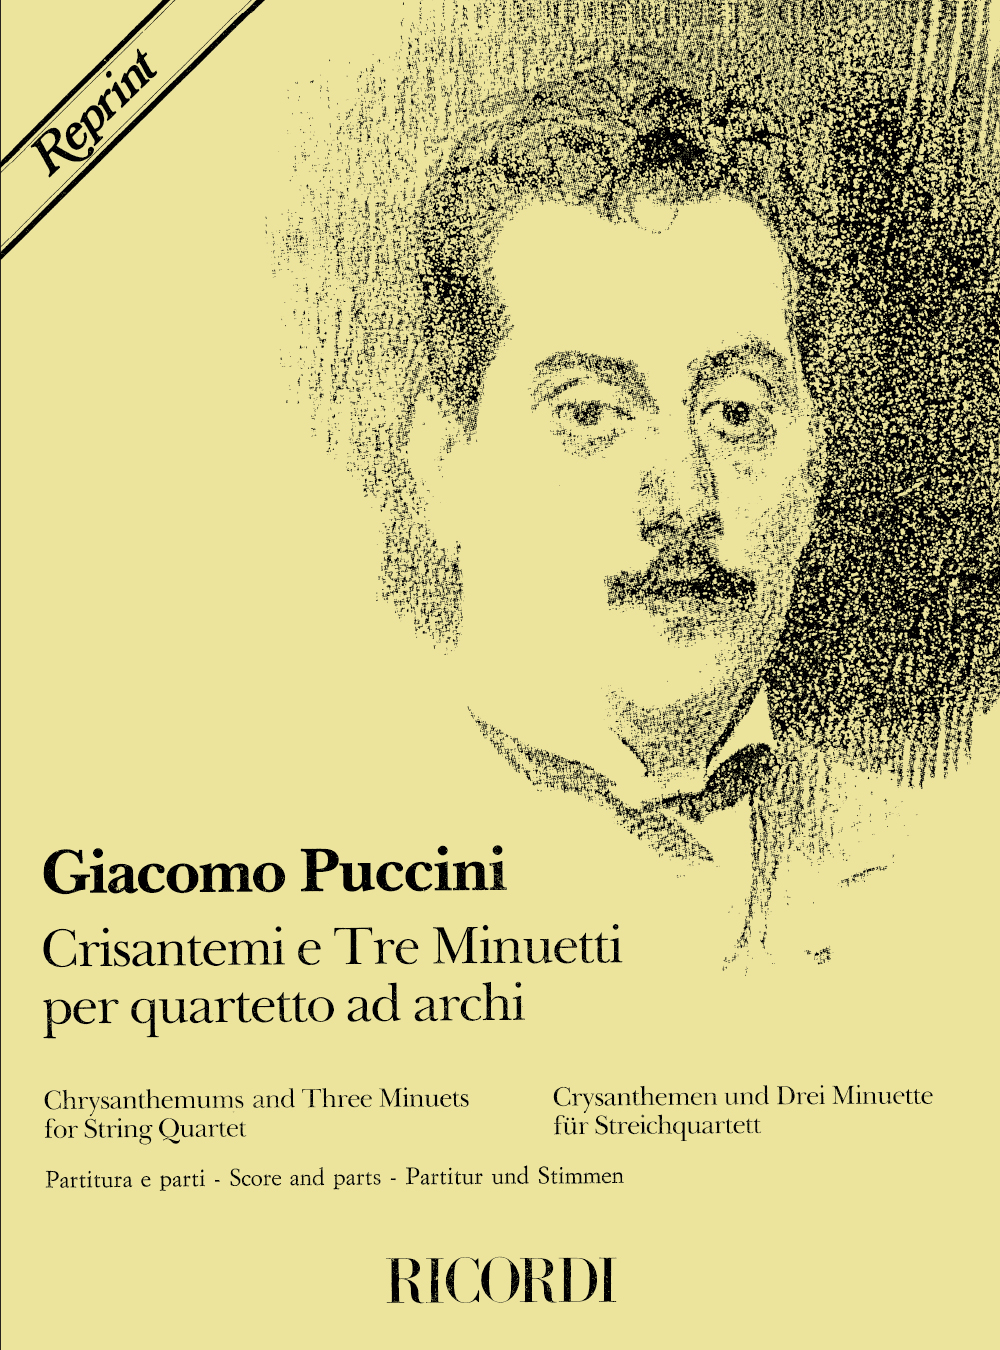 Giacomo Puccini: Chrysanthemums And Three Minuets: String Quartet: Score and